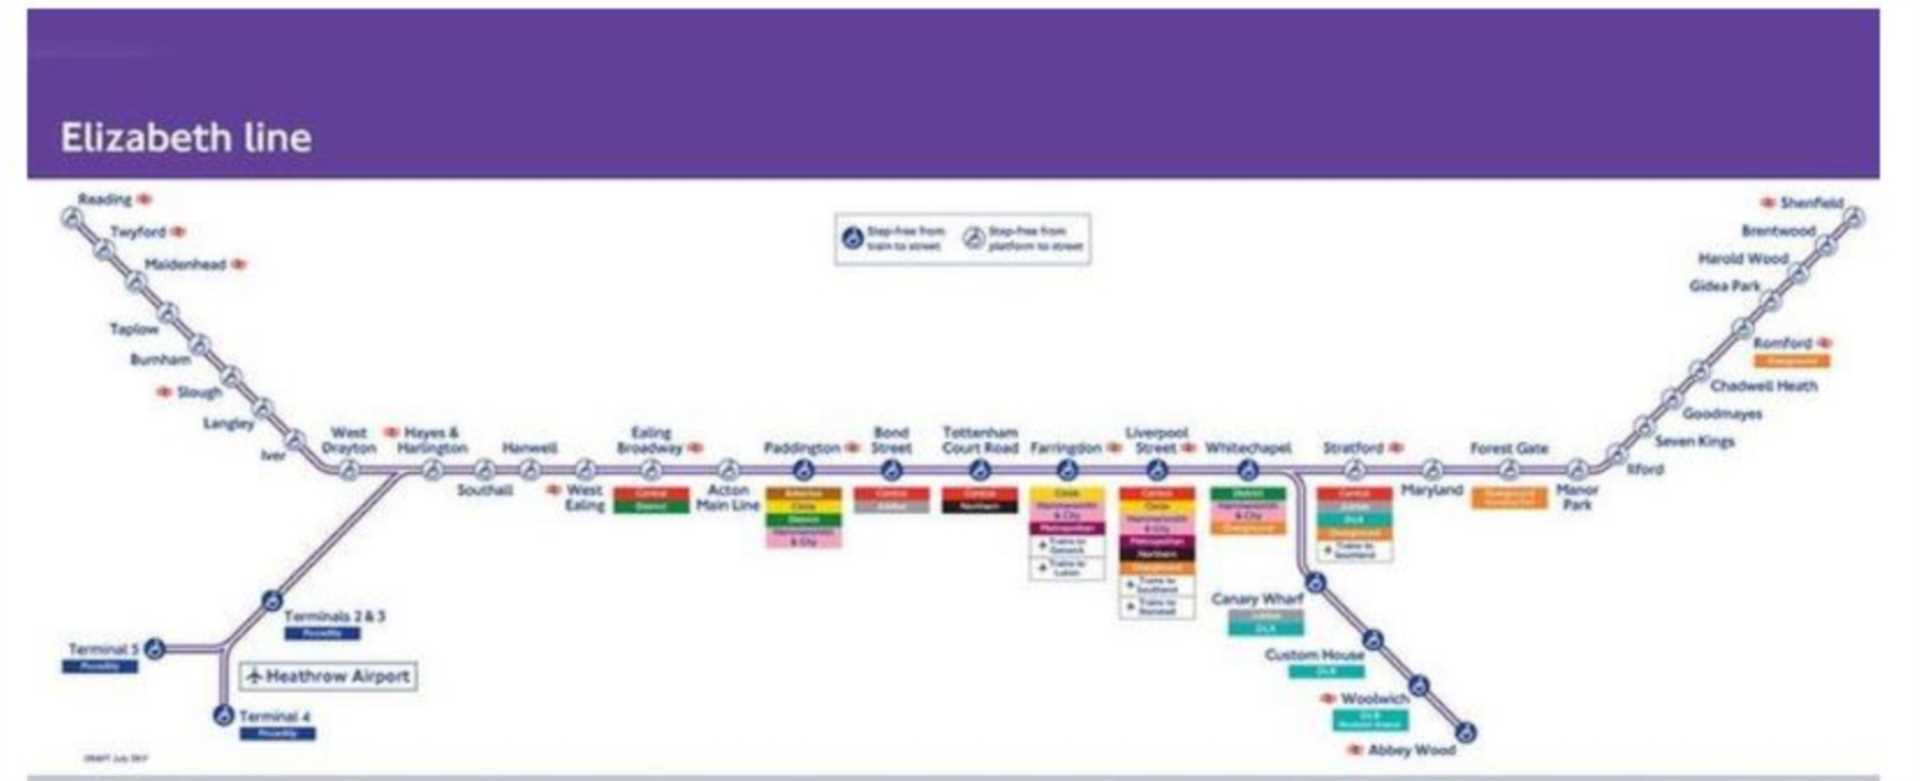 Elizabeth Line to Open on 24th May